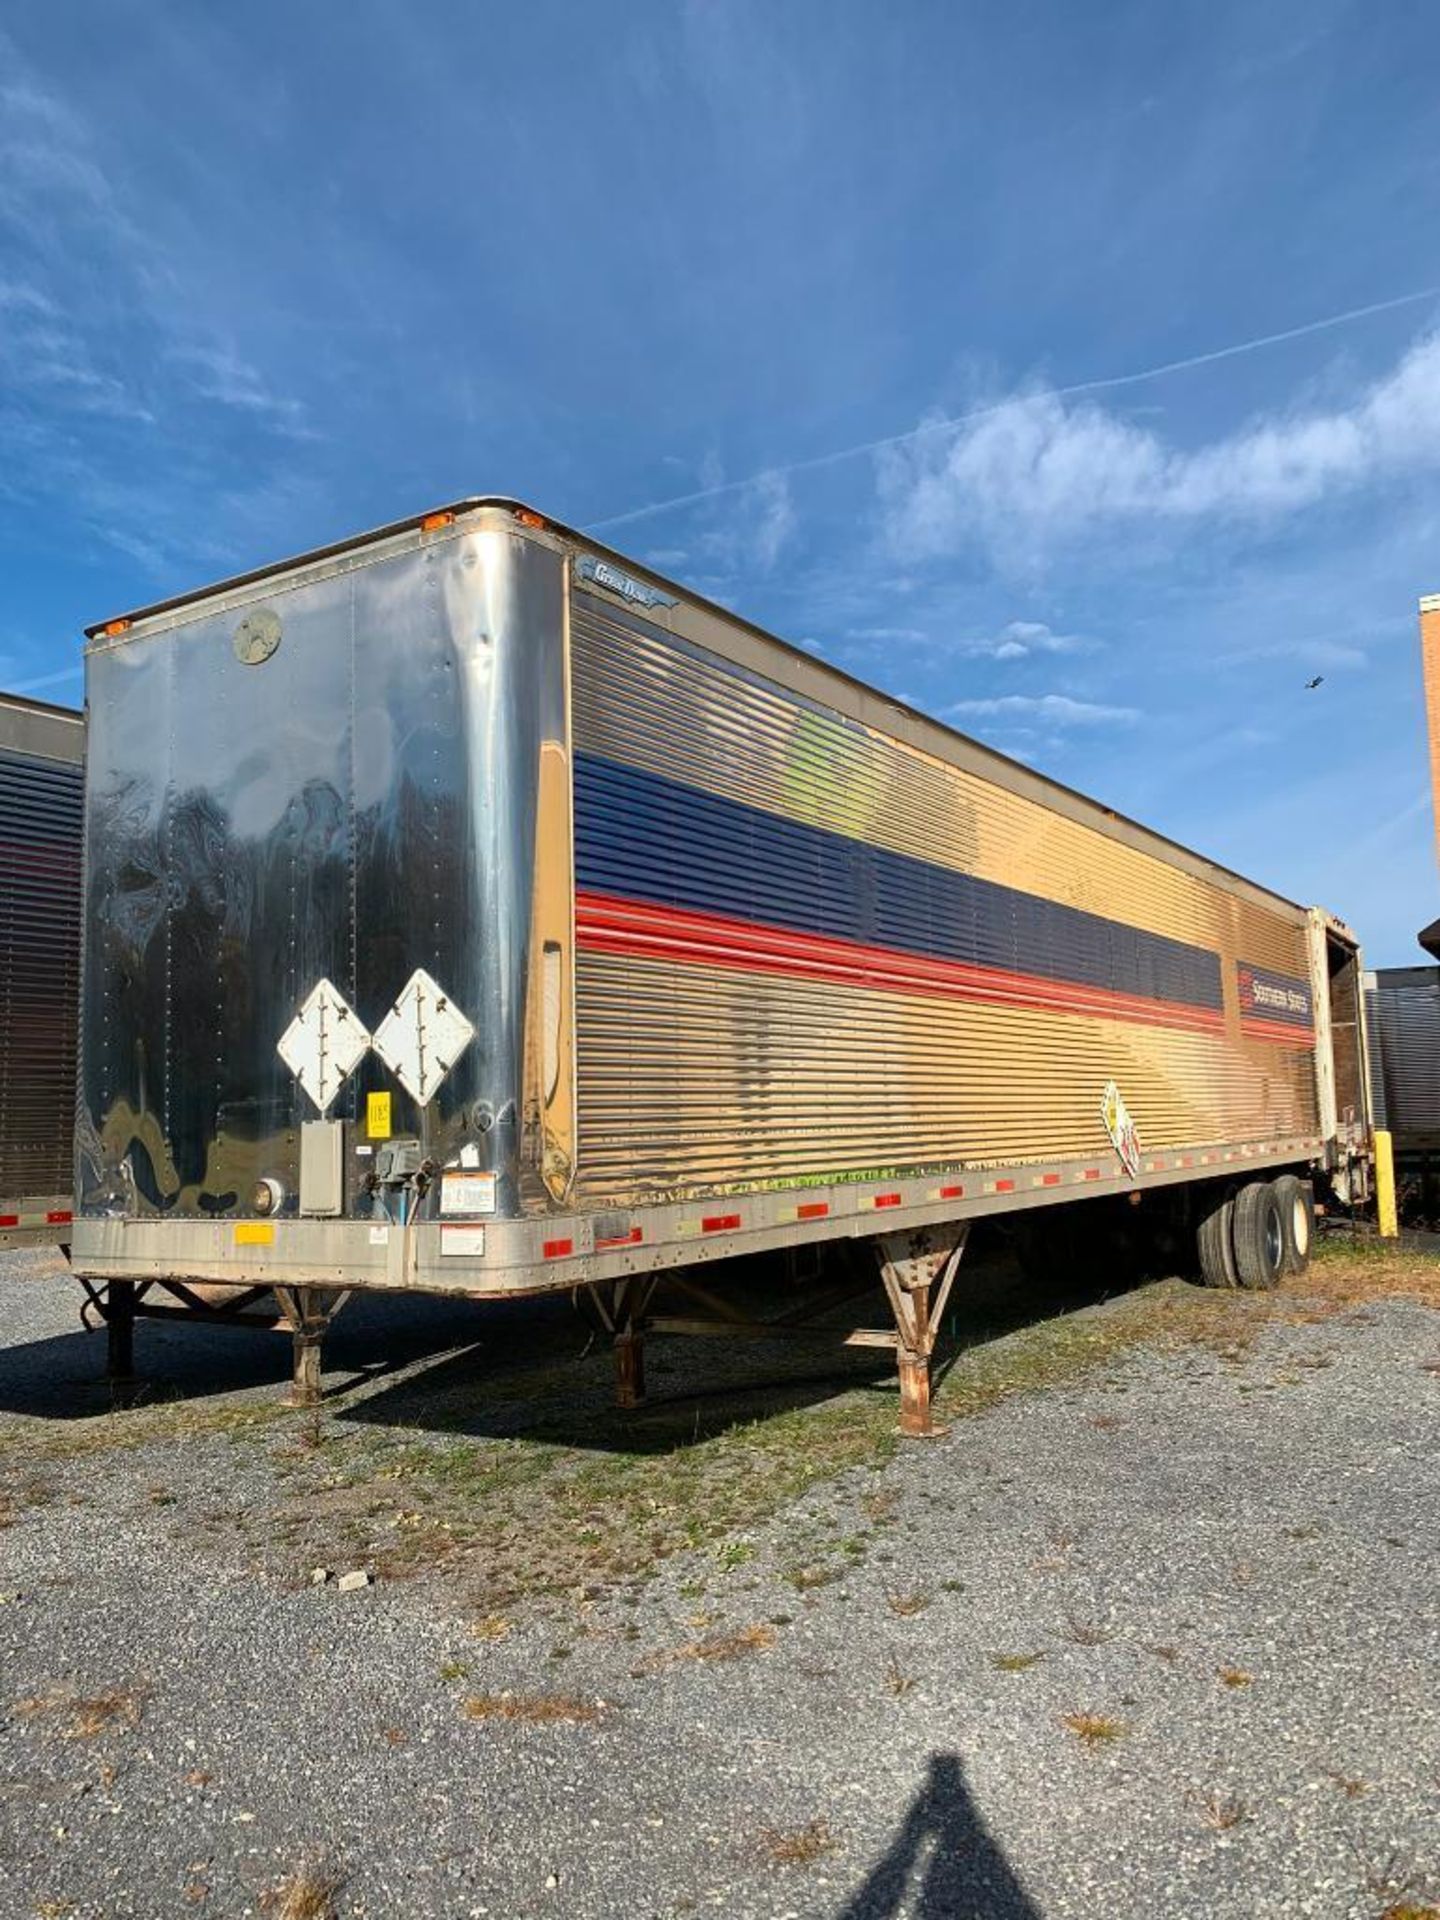 Great Dane Dry Van Trailer, 48', w/ Pallet Content (Not Road Worthy, Used For Storage) (No Title)